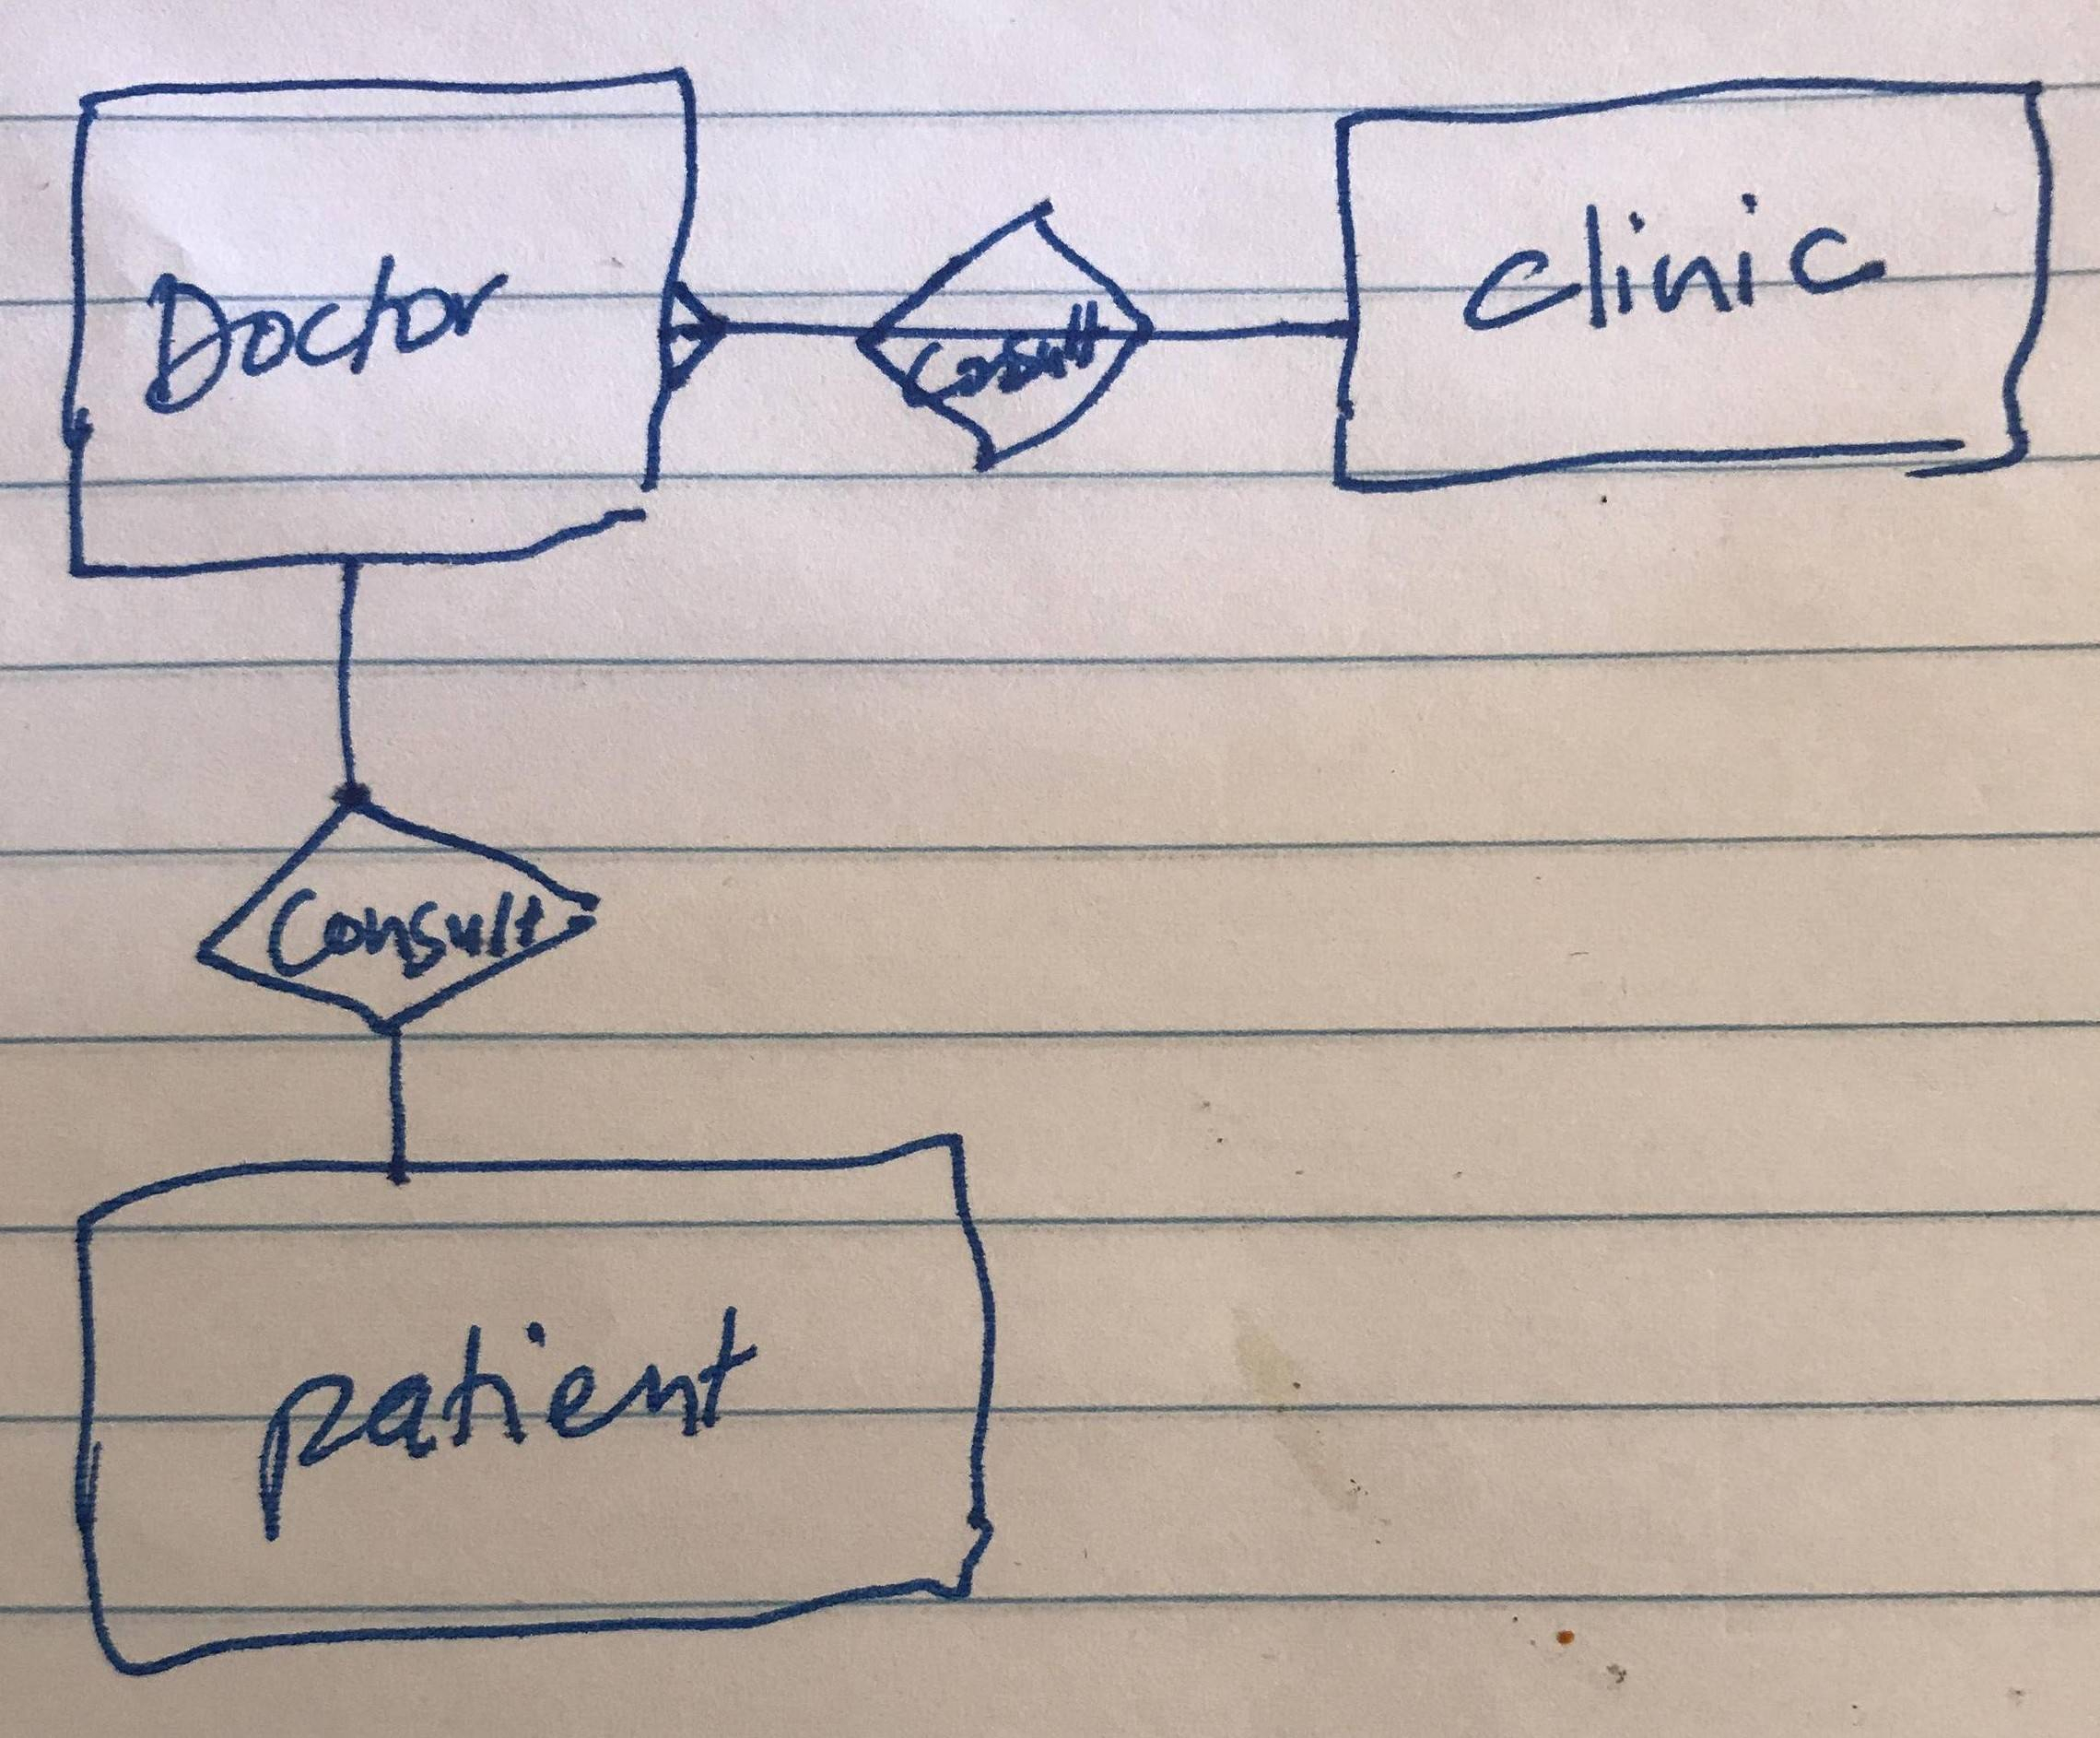 How Can I Draw An Entity-Relationship Diagram For A Medical with regard to How To Draw Entity Relationship Diagram